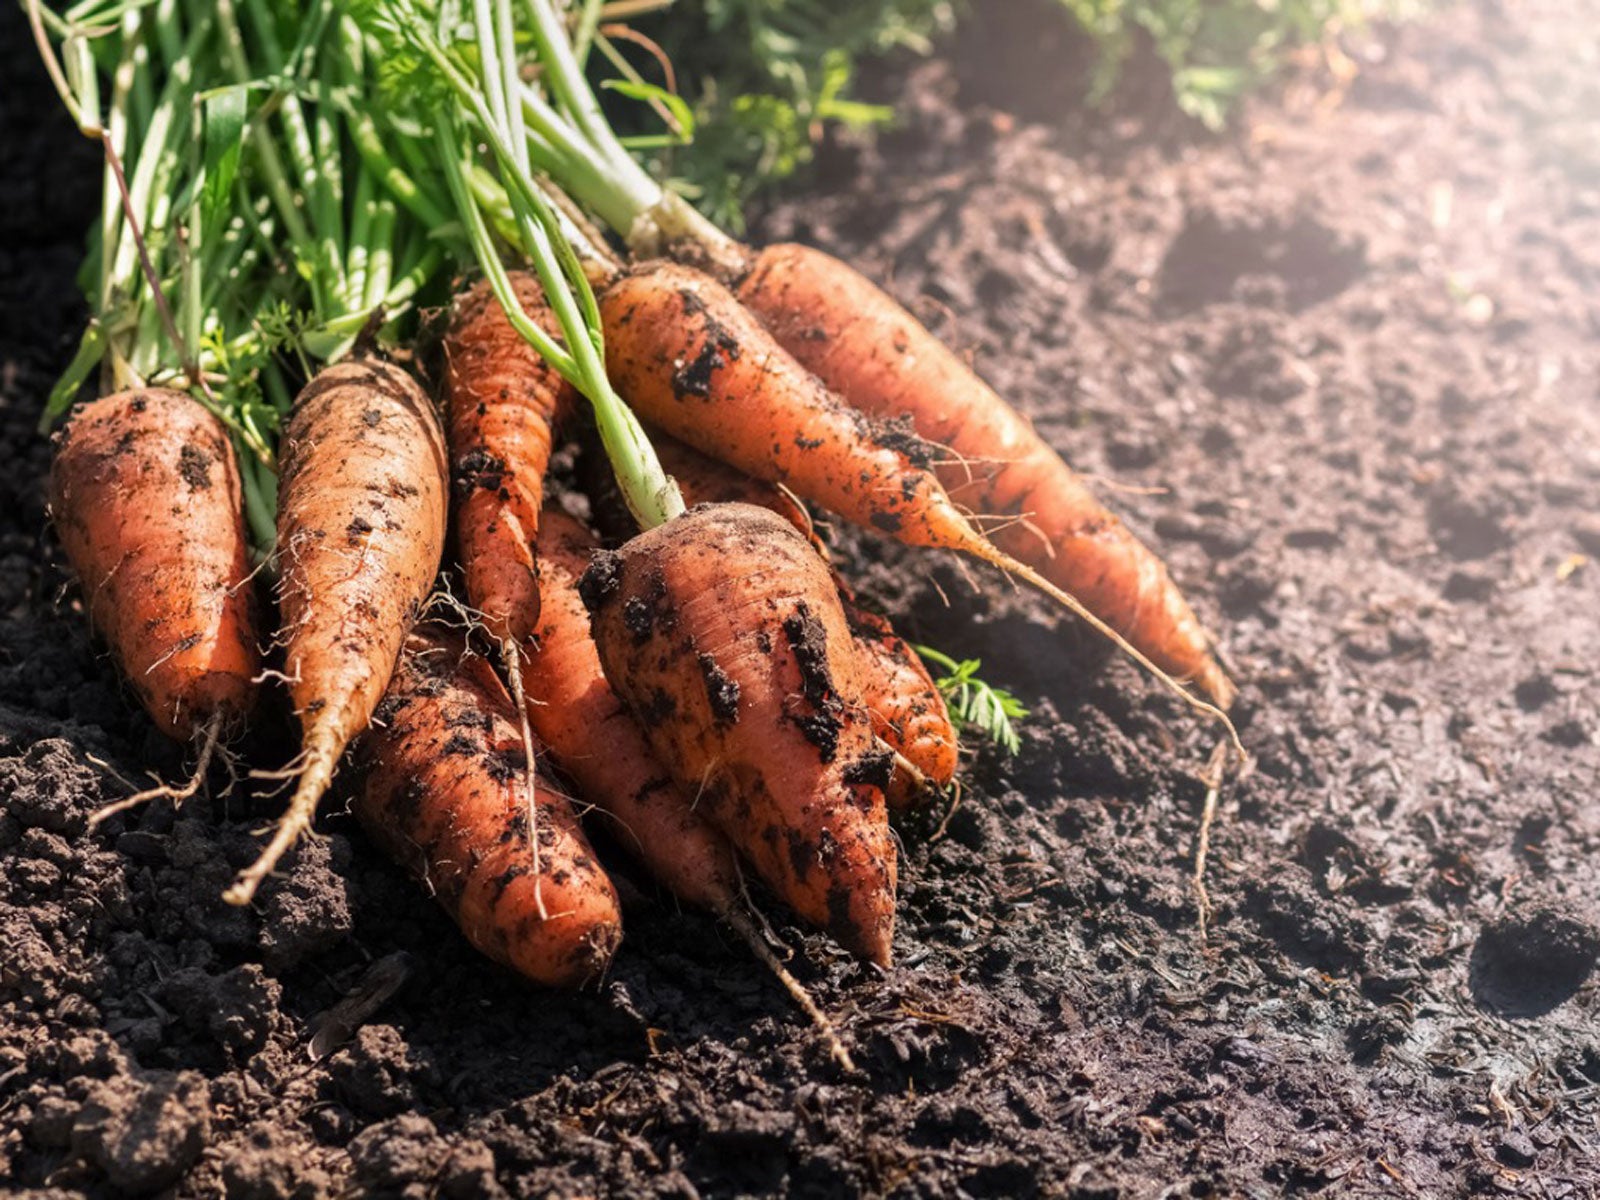 Growing Carrots In Hot Climates: Learn About Heat Tolerant Carrot Plants